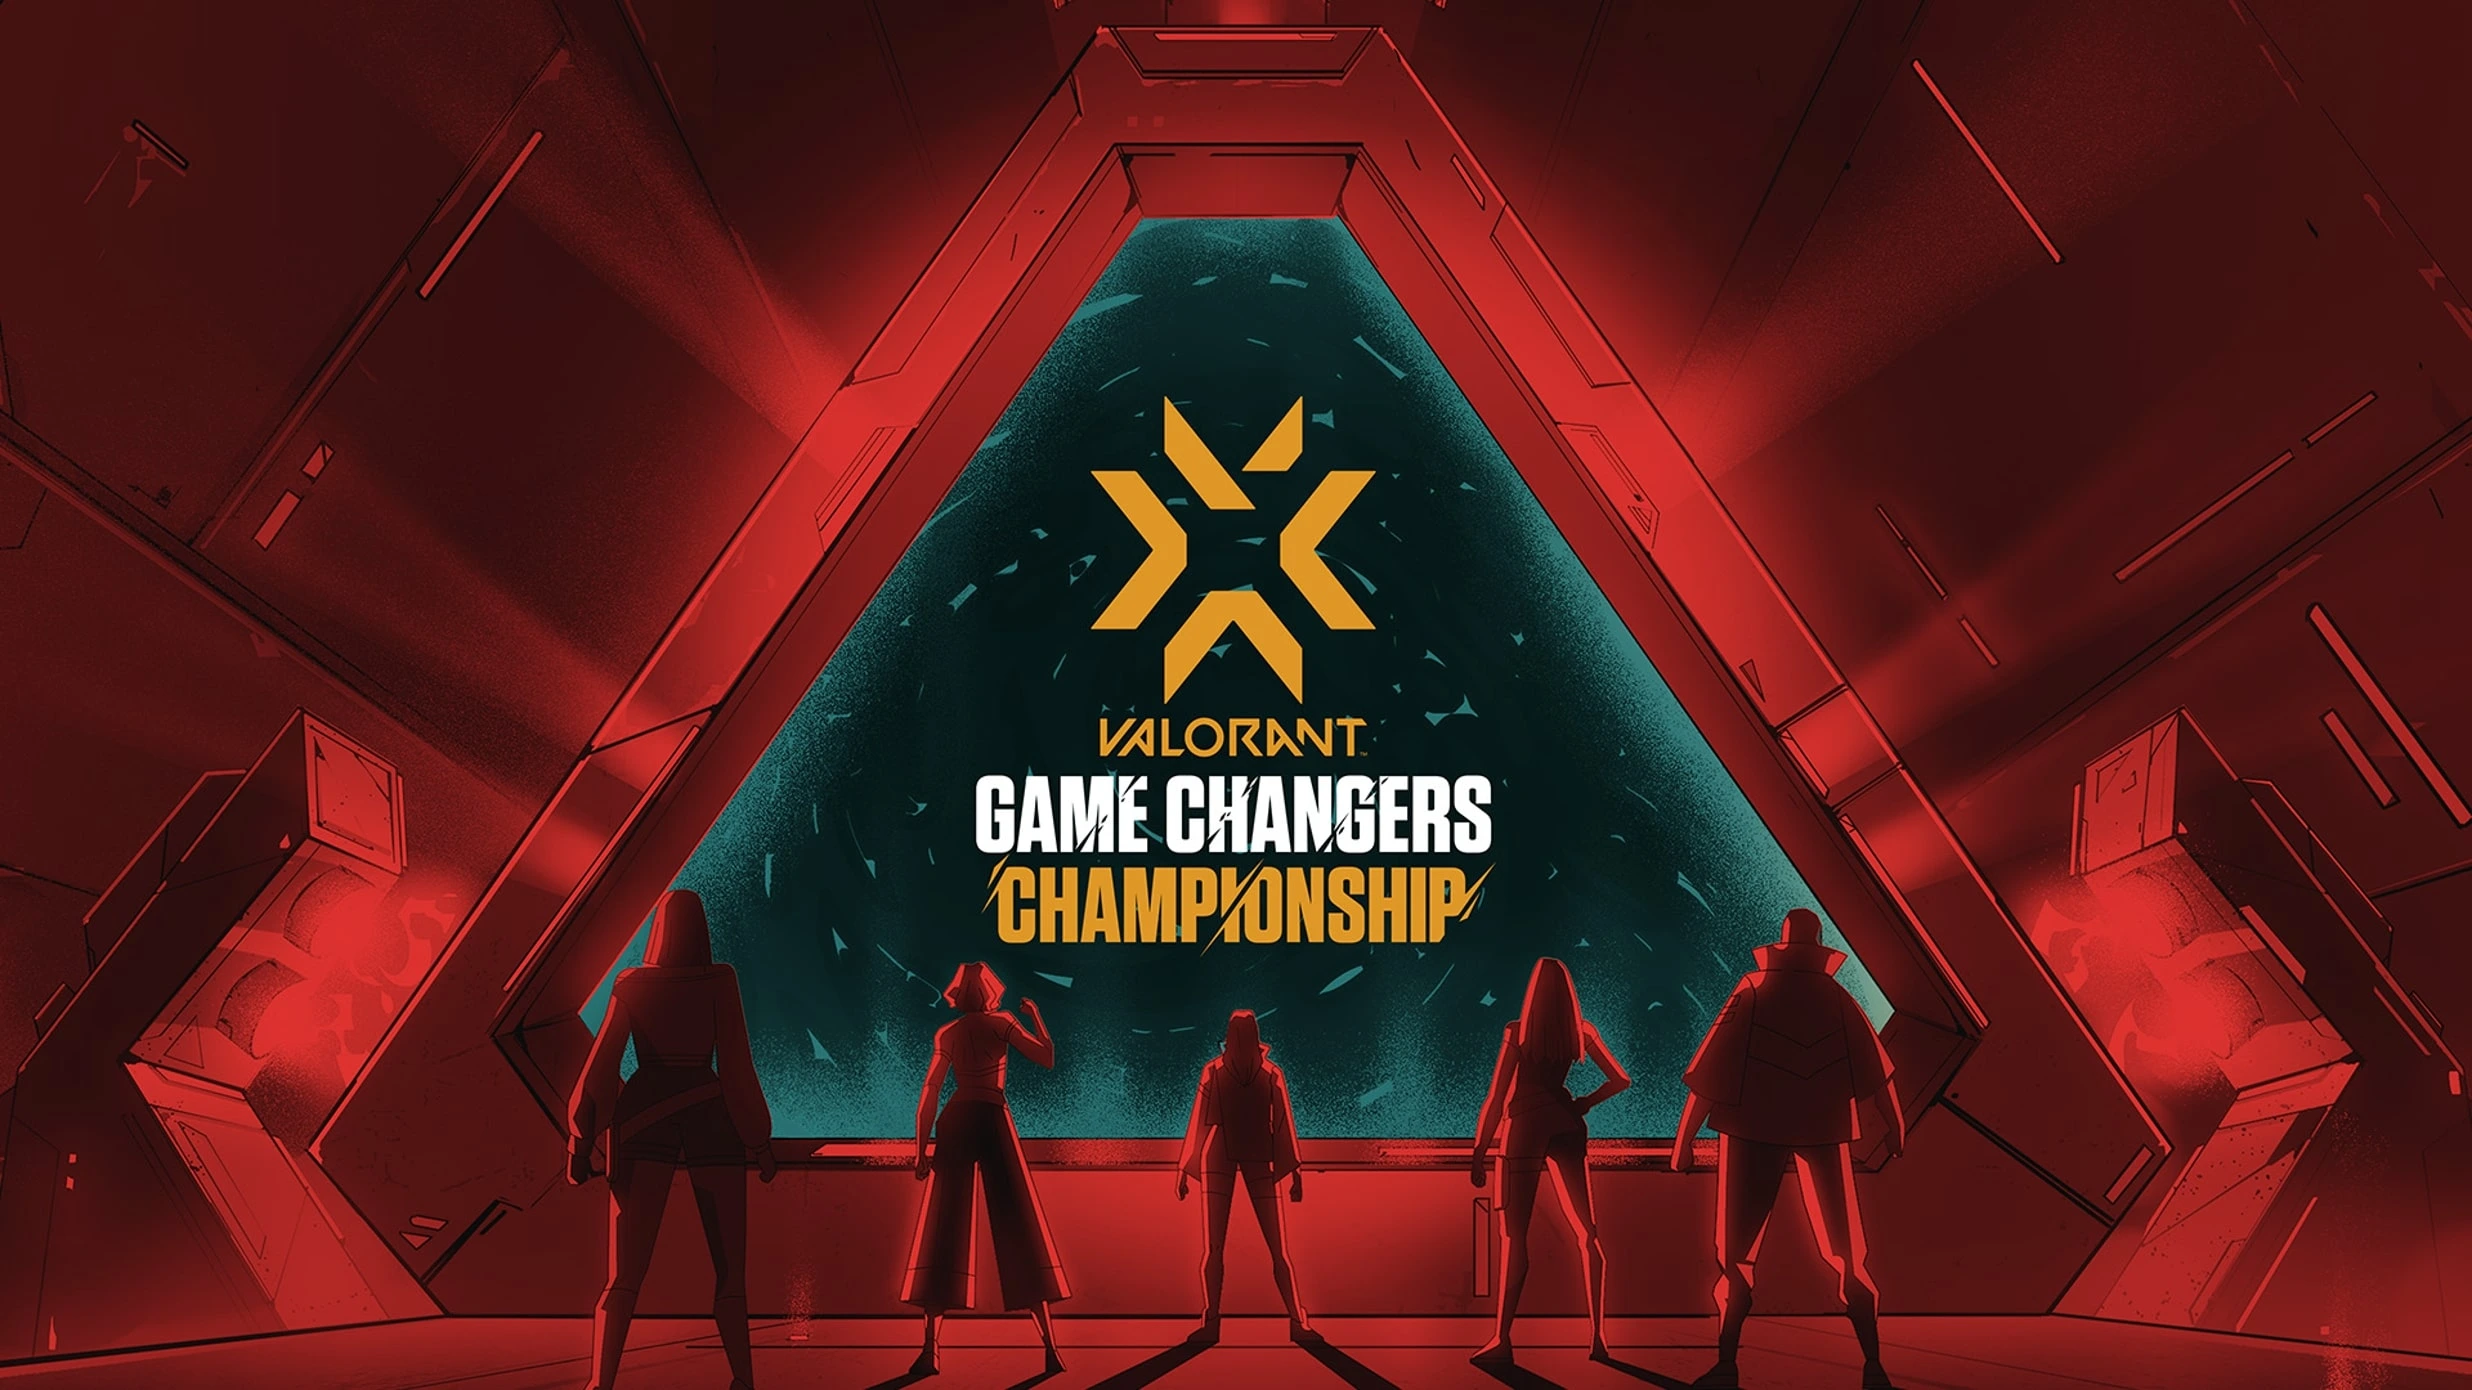 Game Changers VALORANT faces another 3 organizations leaving the league